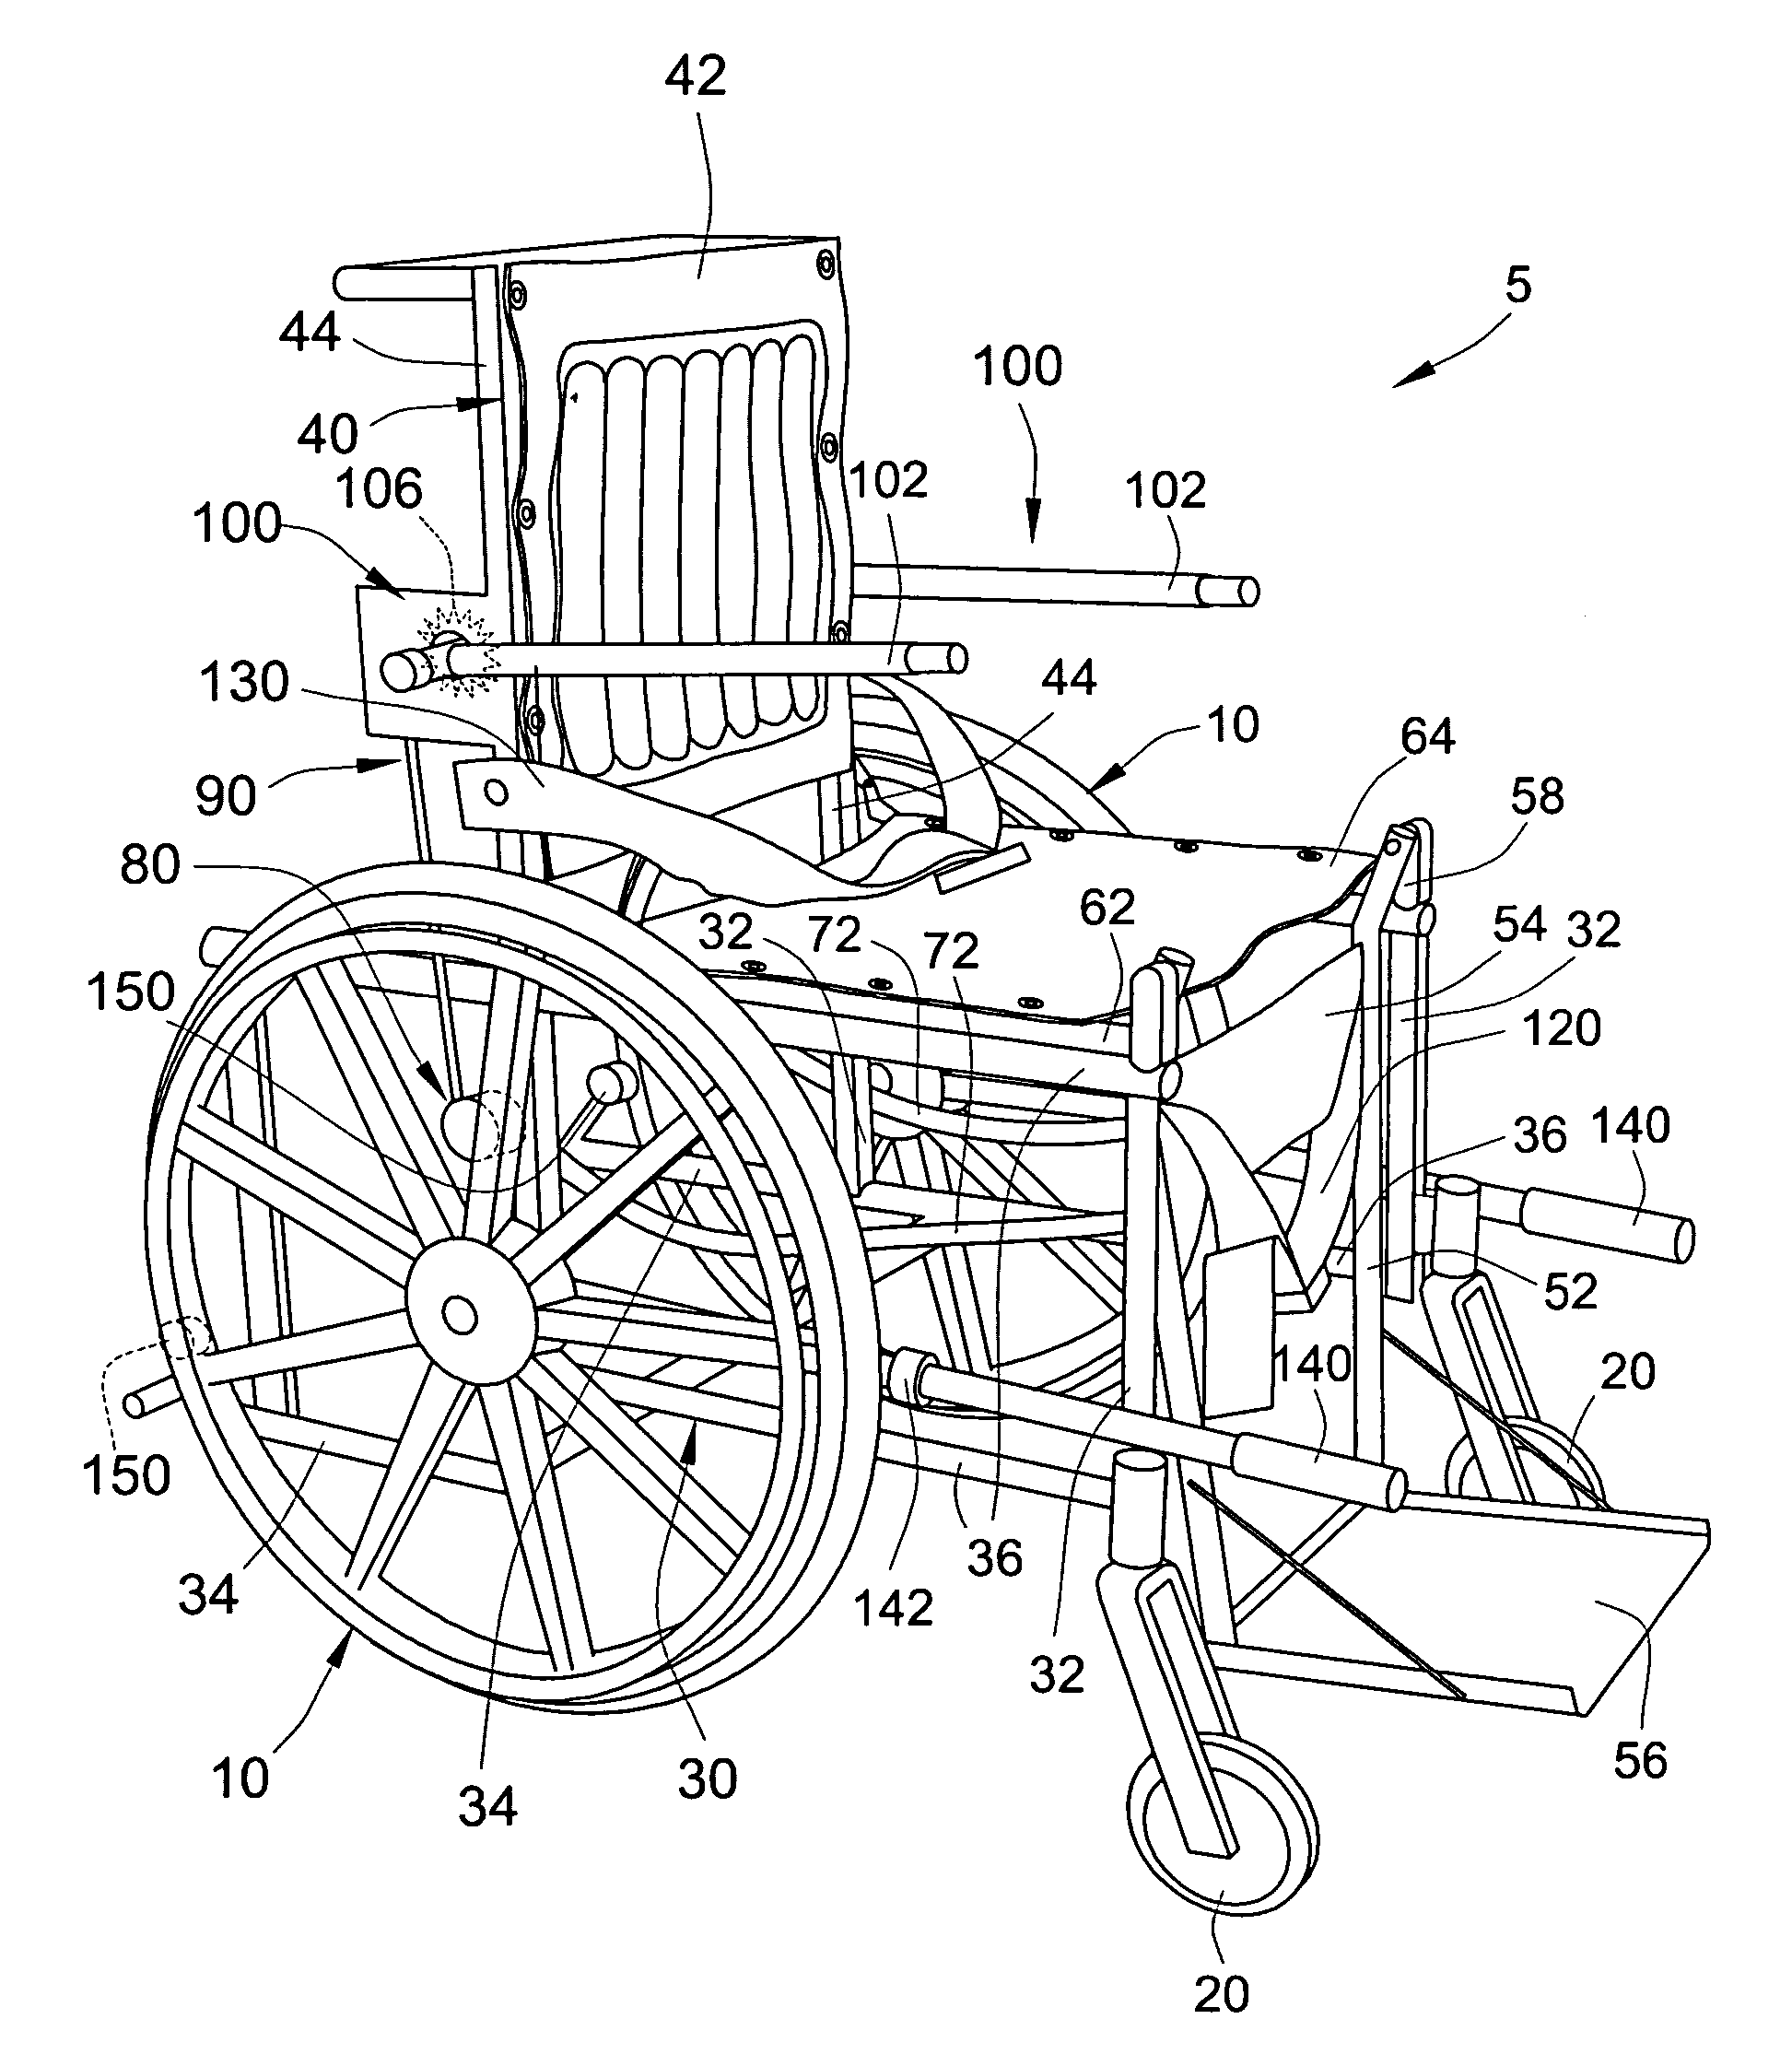 Manually operable standing wheelchair